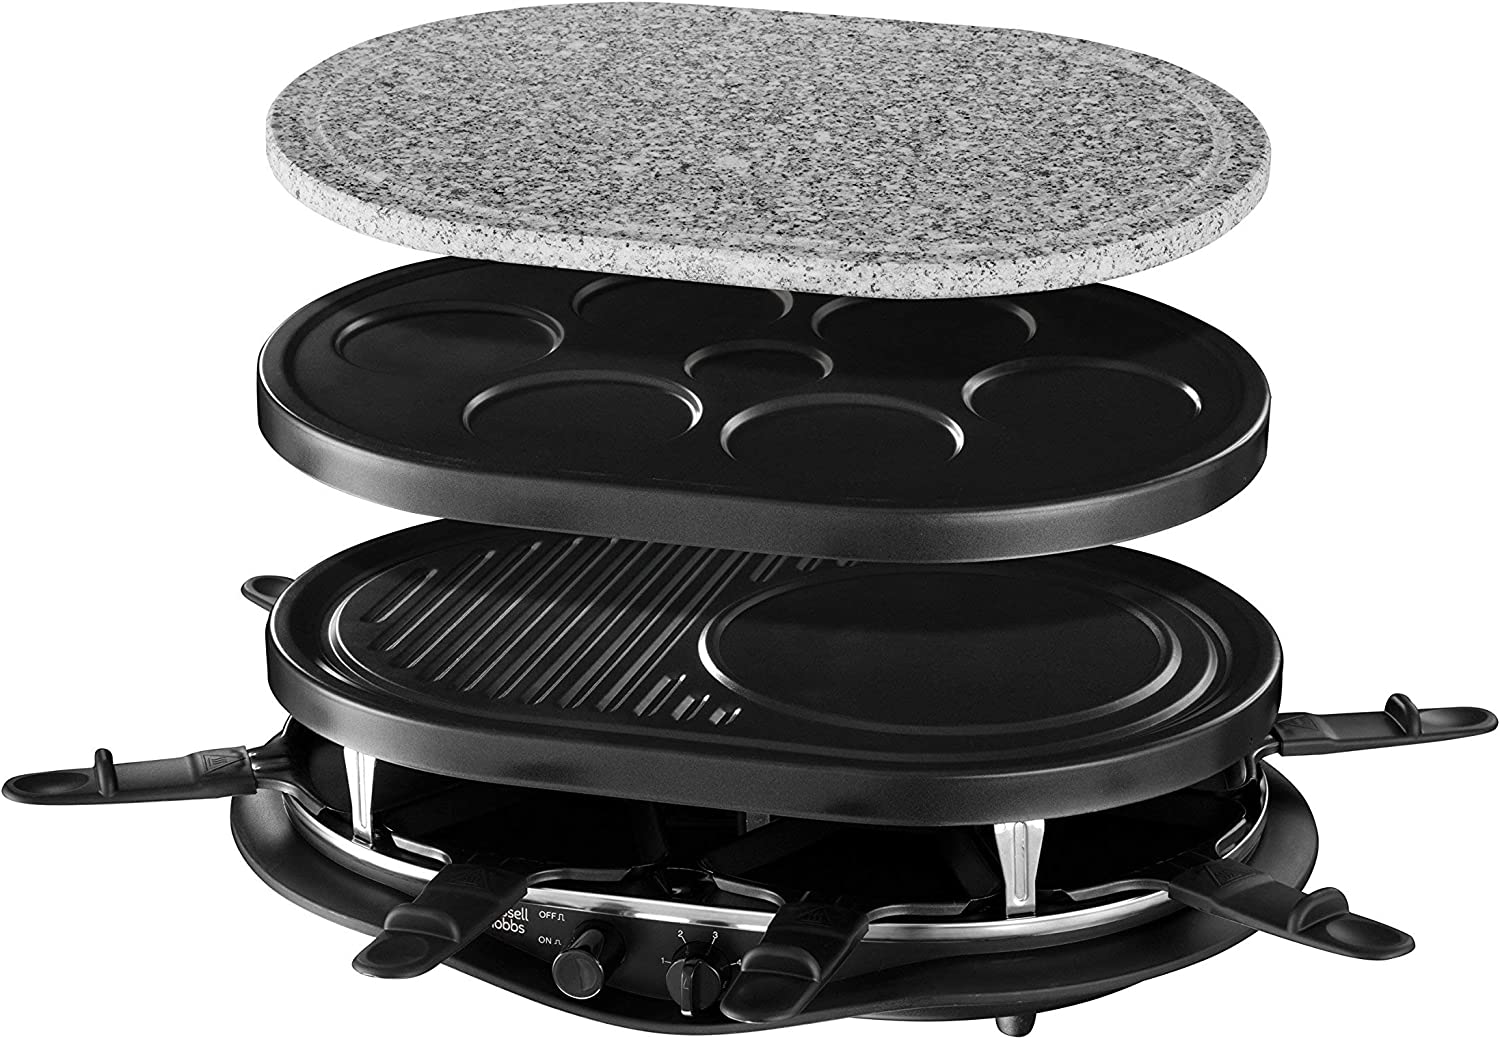 Raclette Russell Hobbs 21000 56/RH – Fiesta 1200 W Thermostat Adjustable Oval